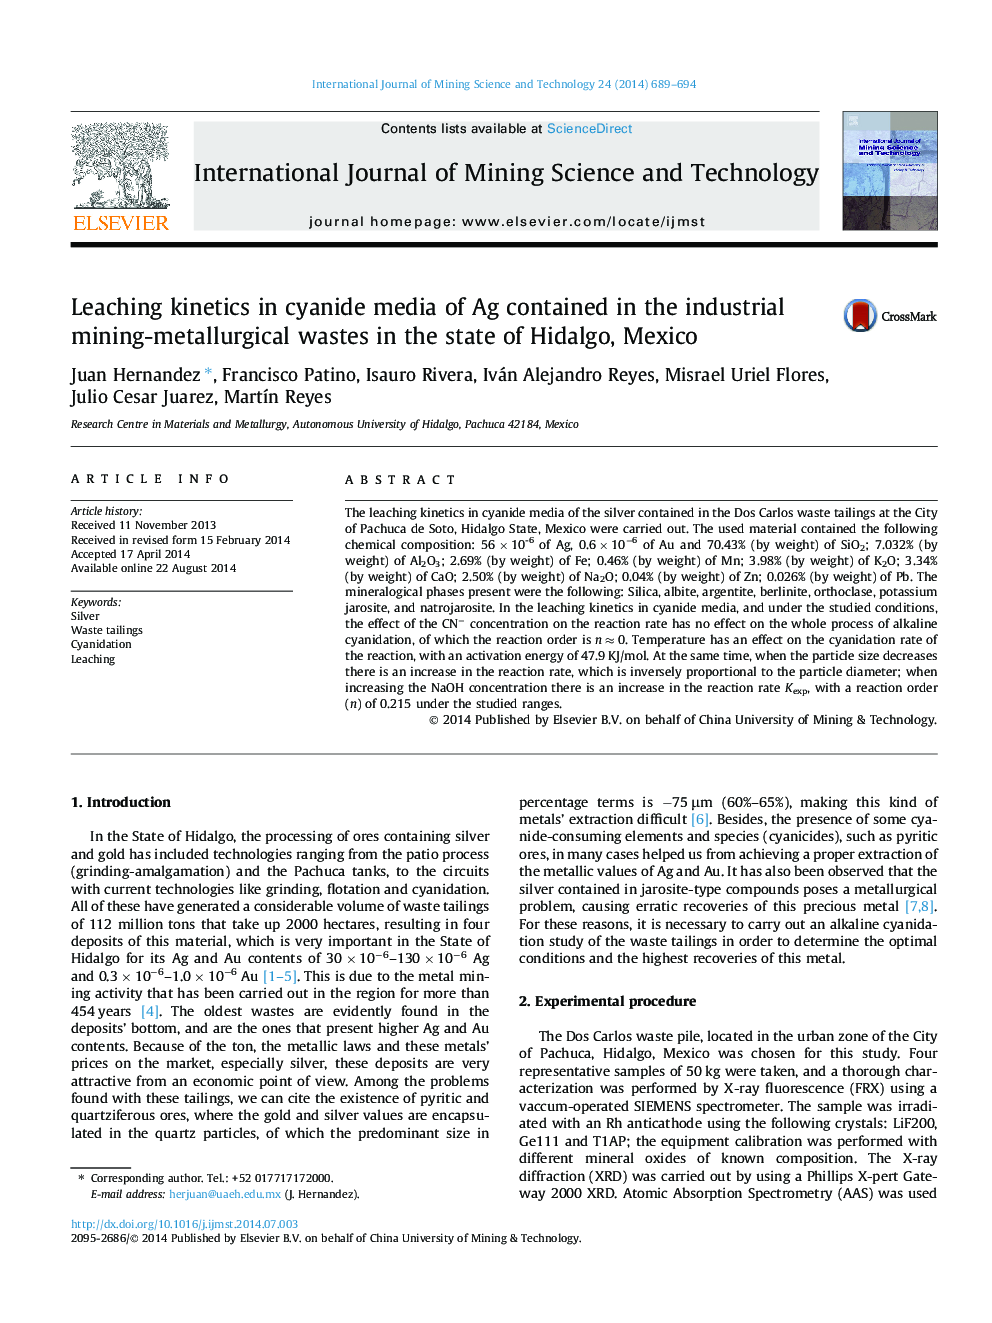 Leaching kinetics in cyanide media of Ag contained in the industrial mining-metallurgical wastes in the state of Hidalgo, Mexico